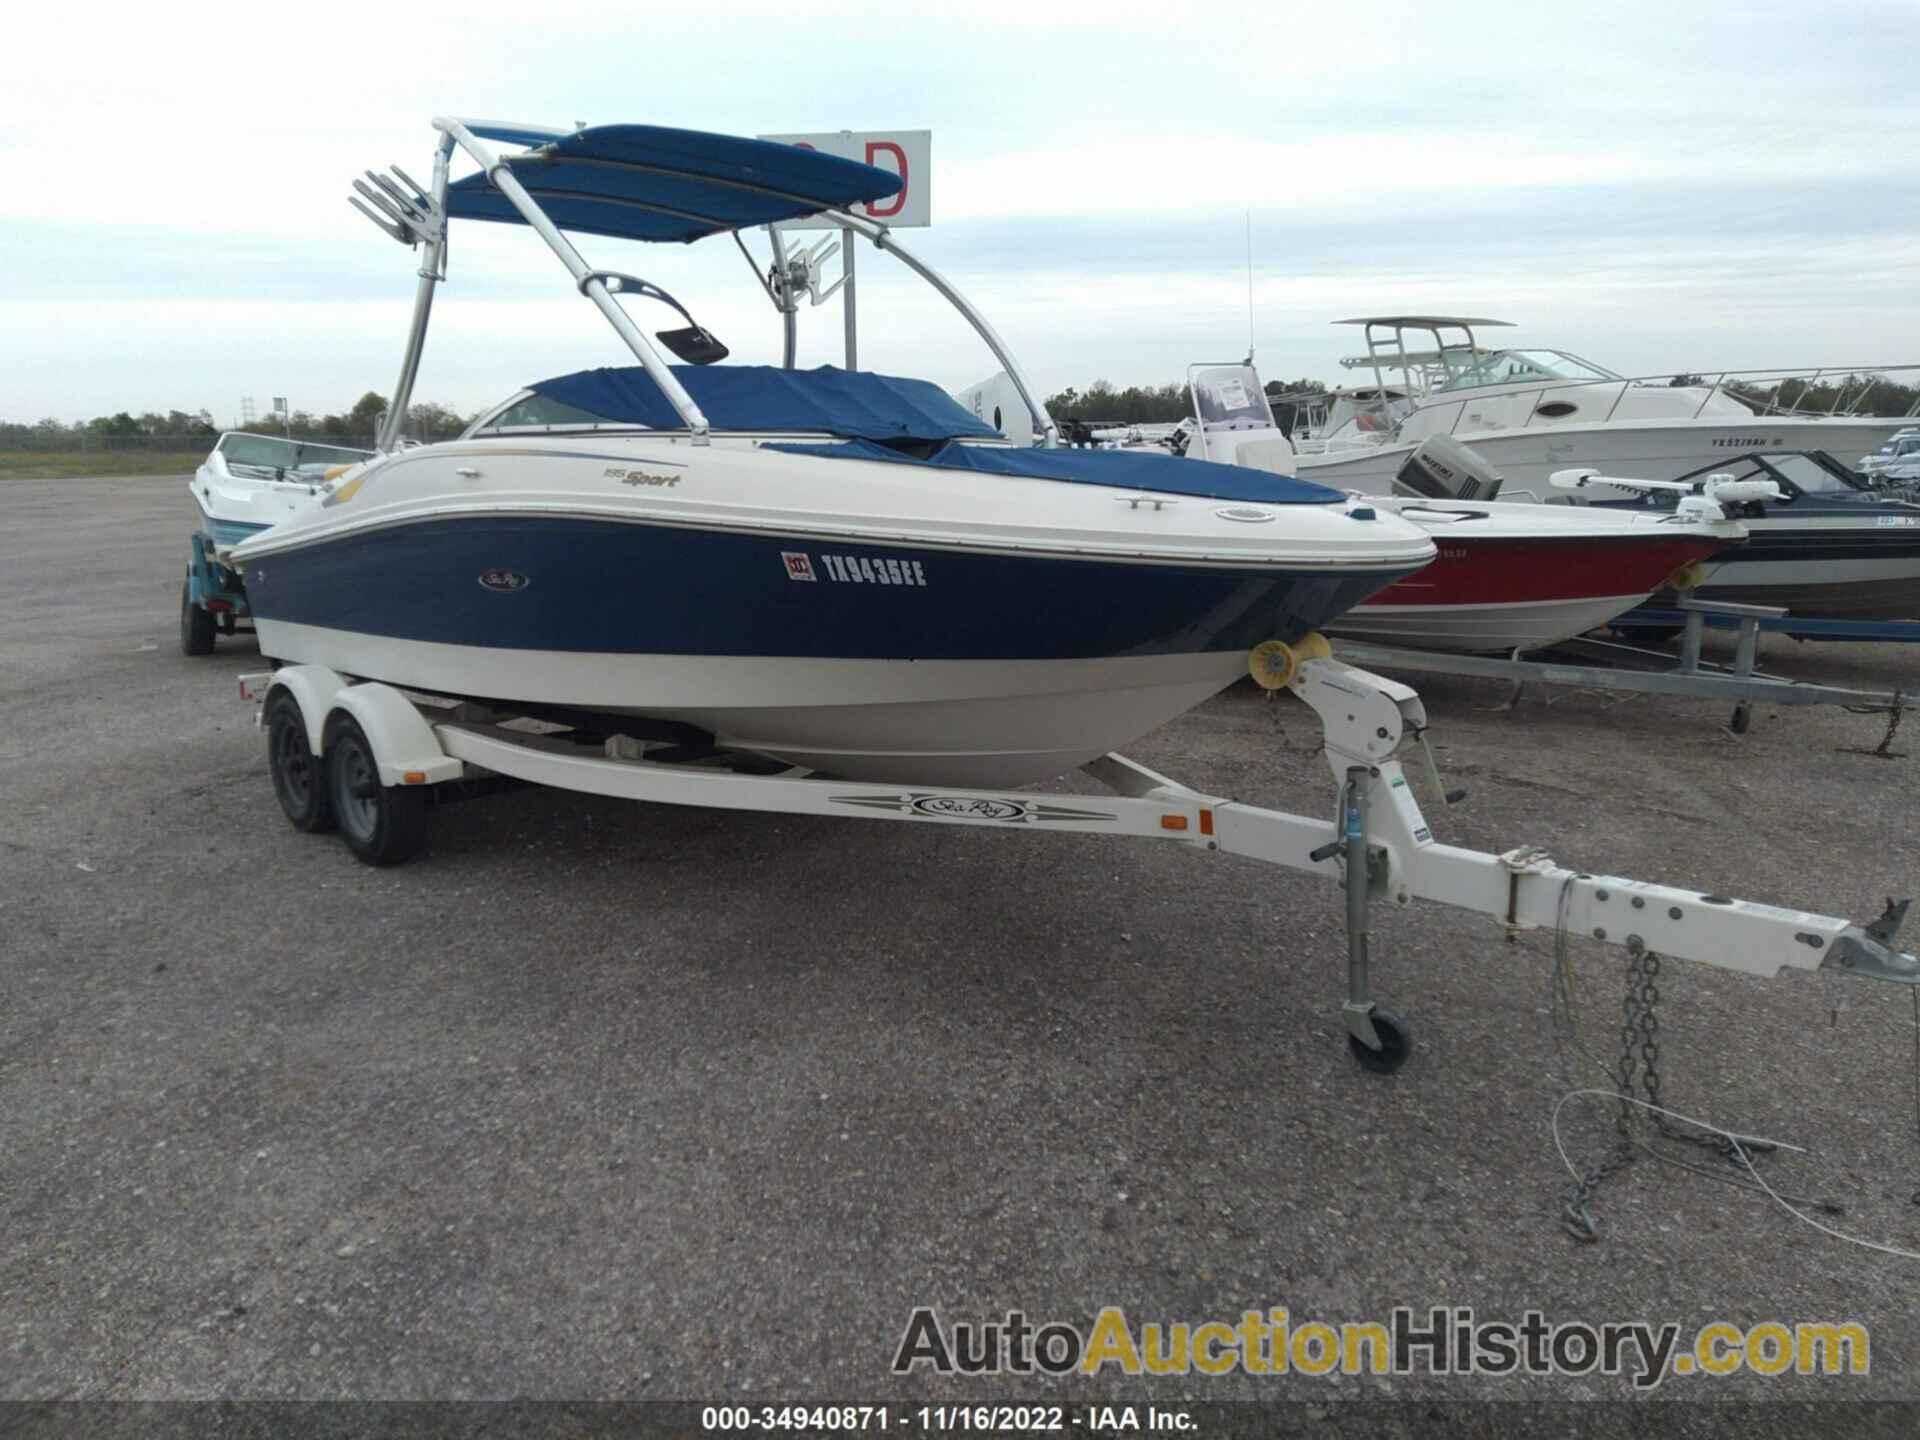 SEA RAY OTHER, SERV1670G607